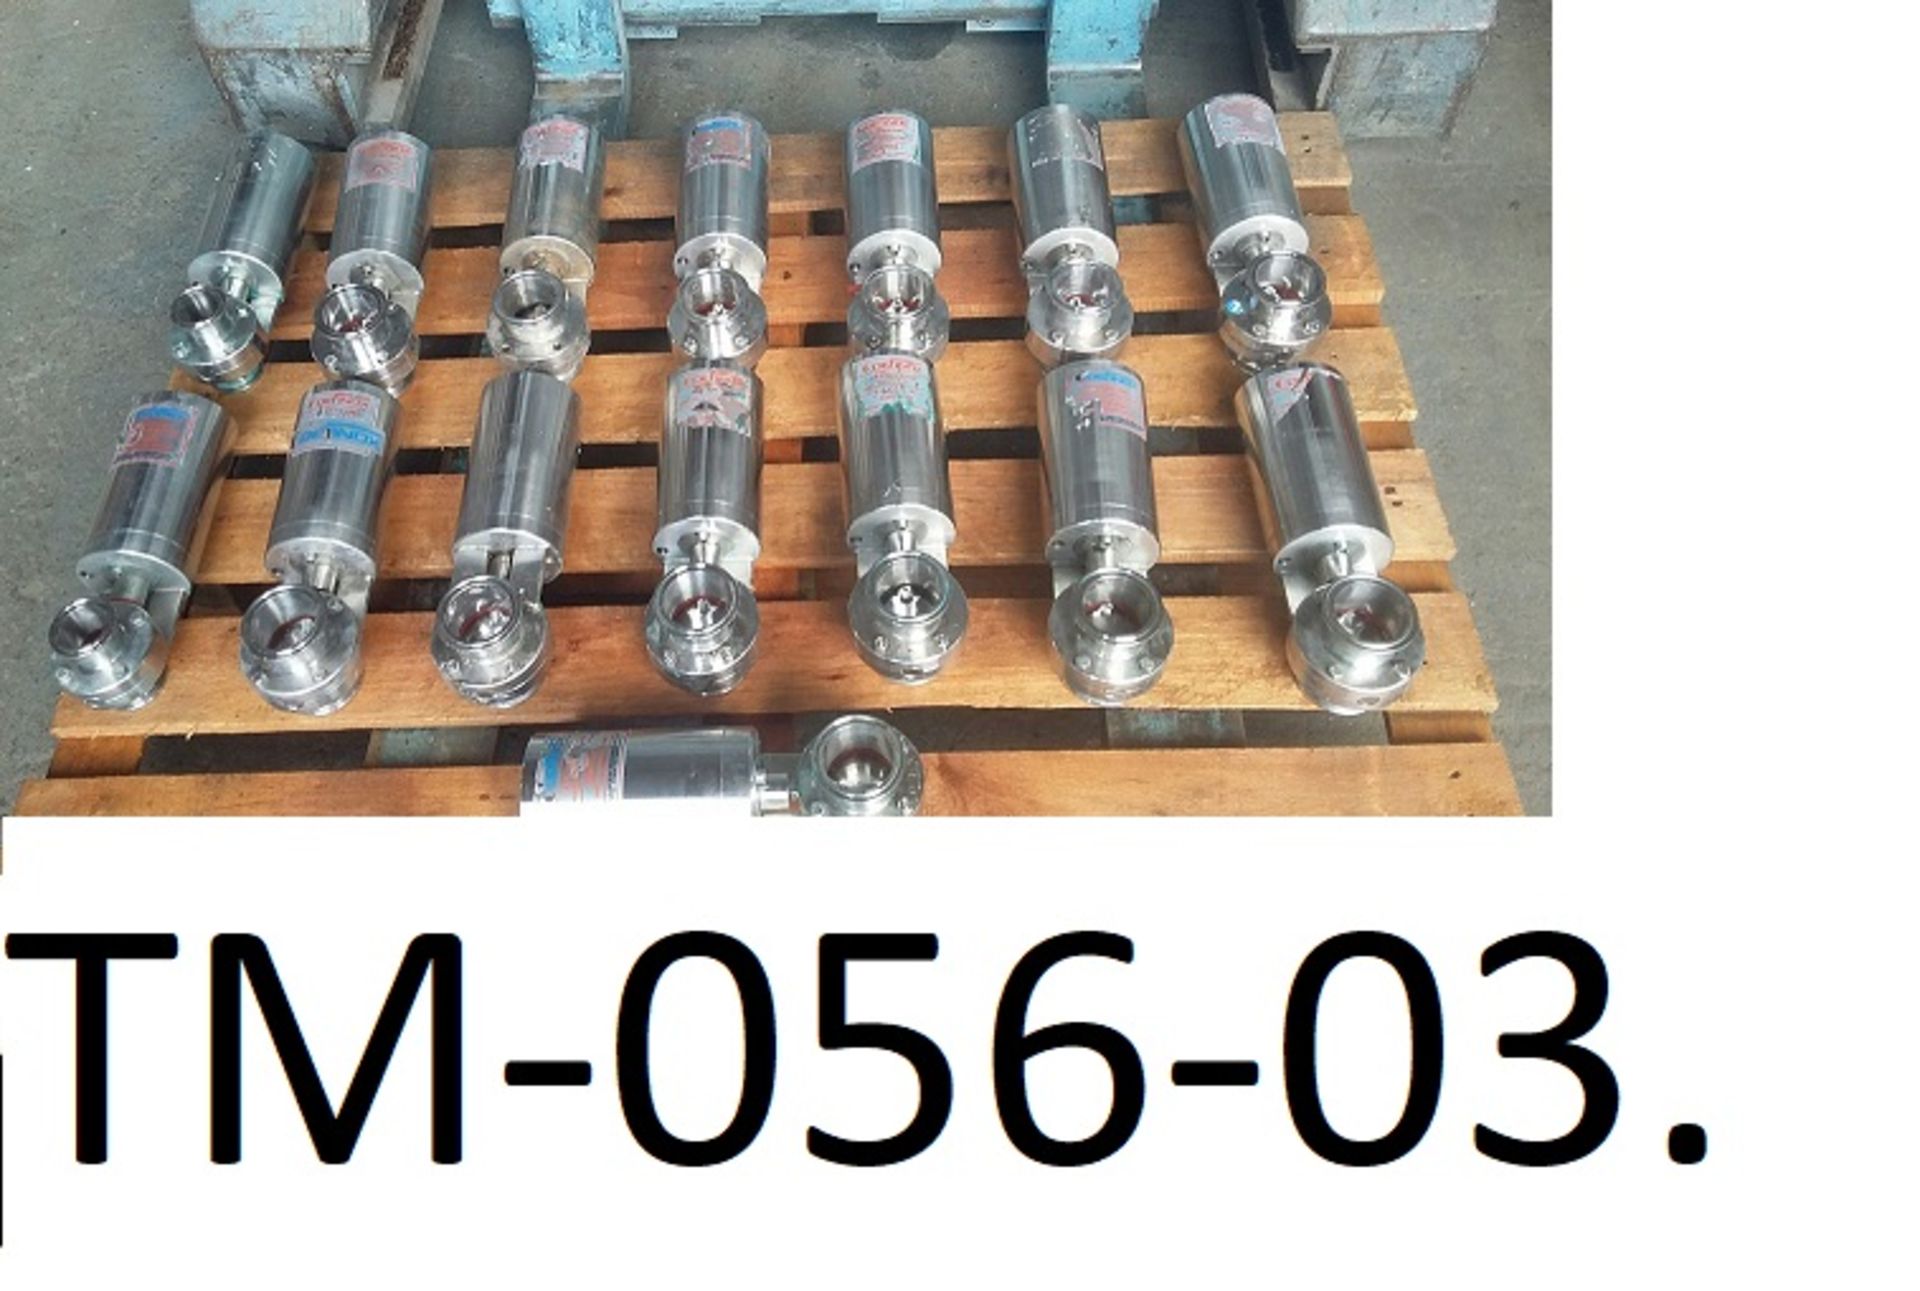 Stainless Steel Butterfly Valves (tested), with stainless steel actuators (Ex Food), free loading - Image 4 of 4